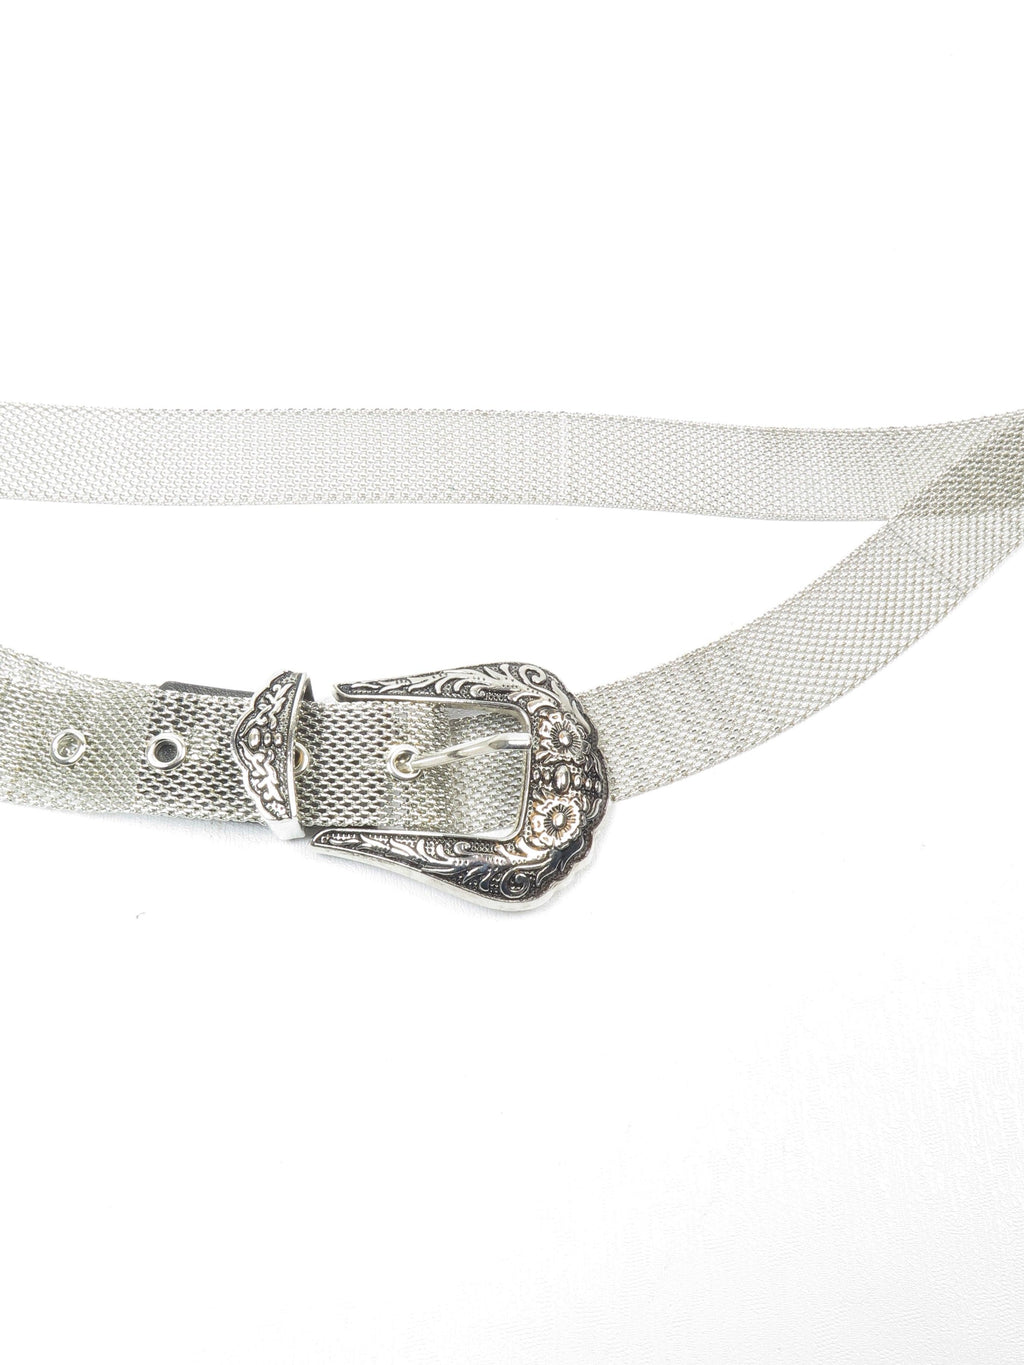 Silver Chain Mesh Western Belt S/M - The Harlequin